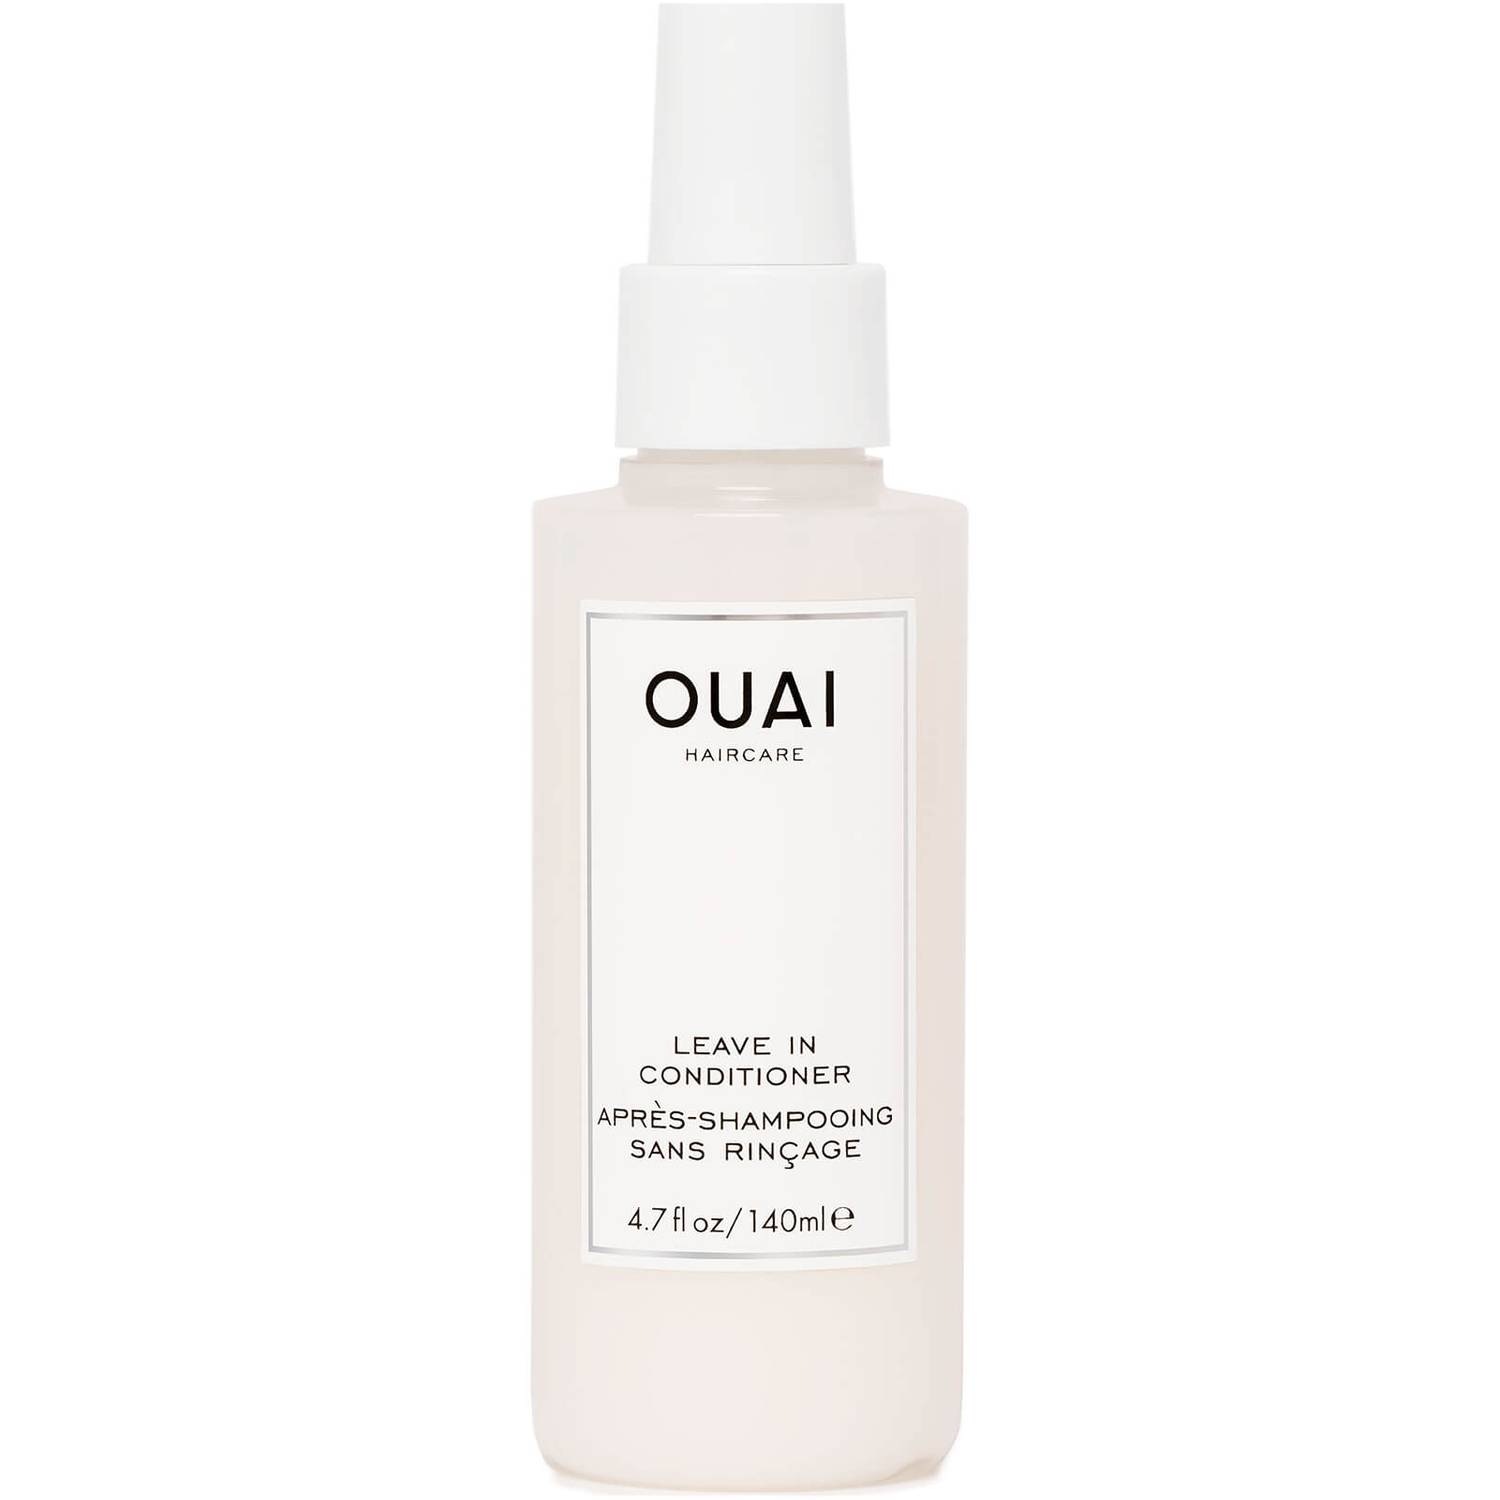 Ouai, Leave-In Conditioner (Source: www.cultbeauty.com)